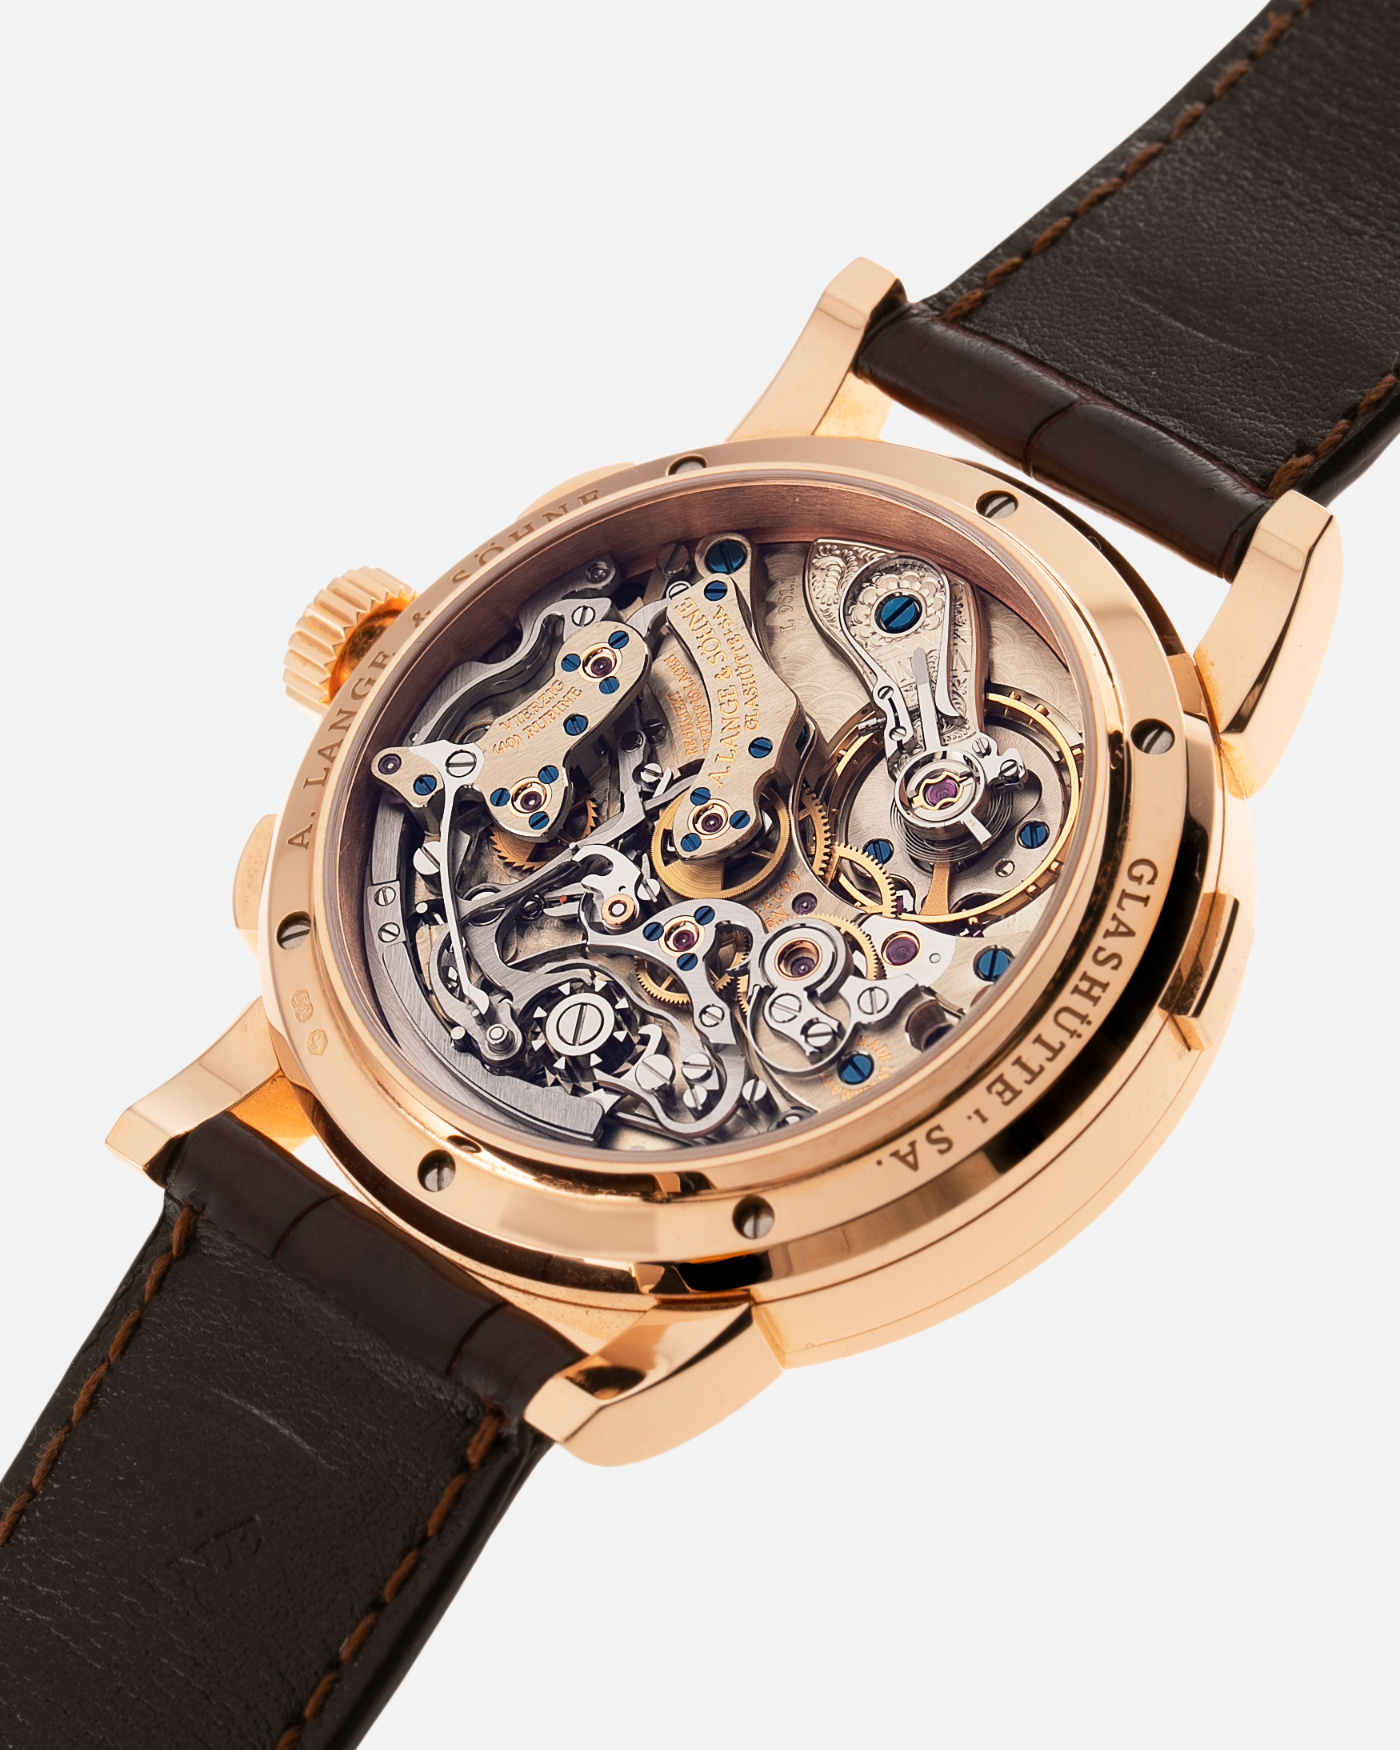 Brand: A. Lange & Sohne Year: 2000’s Model: Datograph Reference Number: 403.032 Material: 18k Rose Gold Movement: Manual Winding L951.1 Case Diameter: 39mm Bracelet/Strap: A. Lange & Sohne Brown Alligator and 18k Rose Gold Tang Buckle